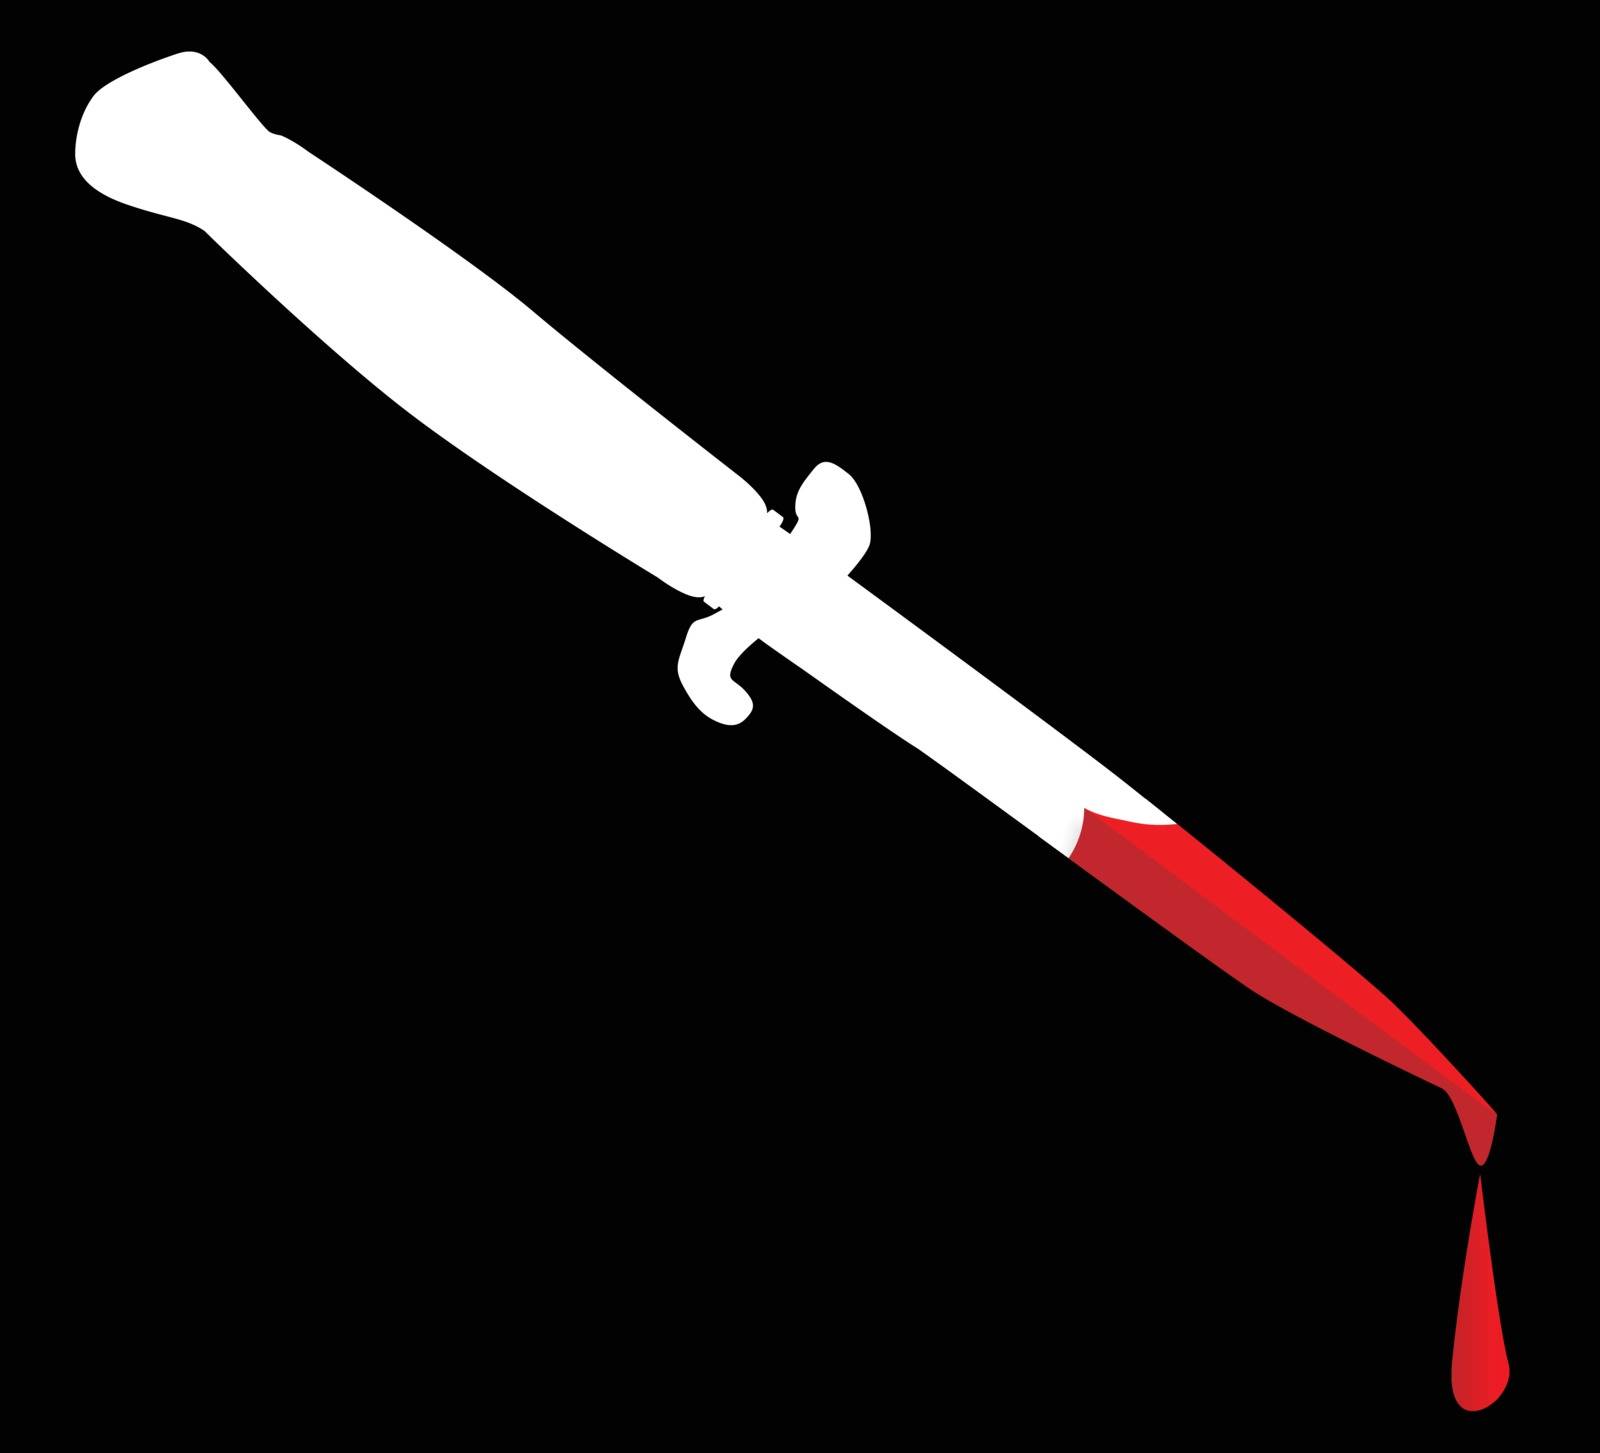 A typical gangland flick knife weapon in silhouette with blood over a black background